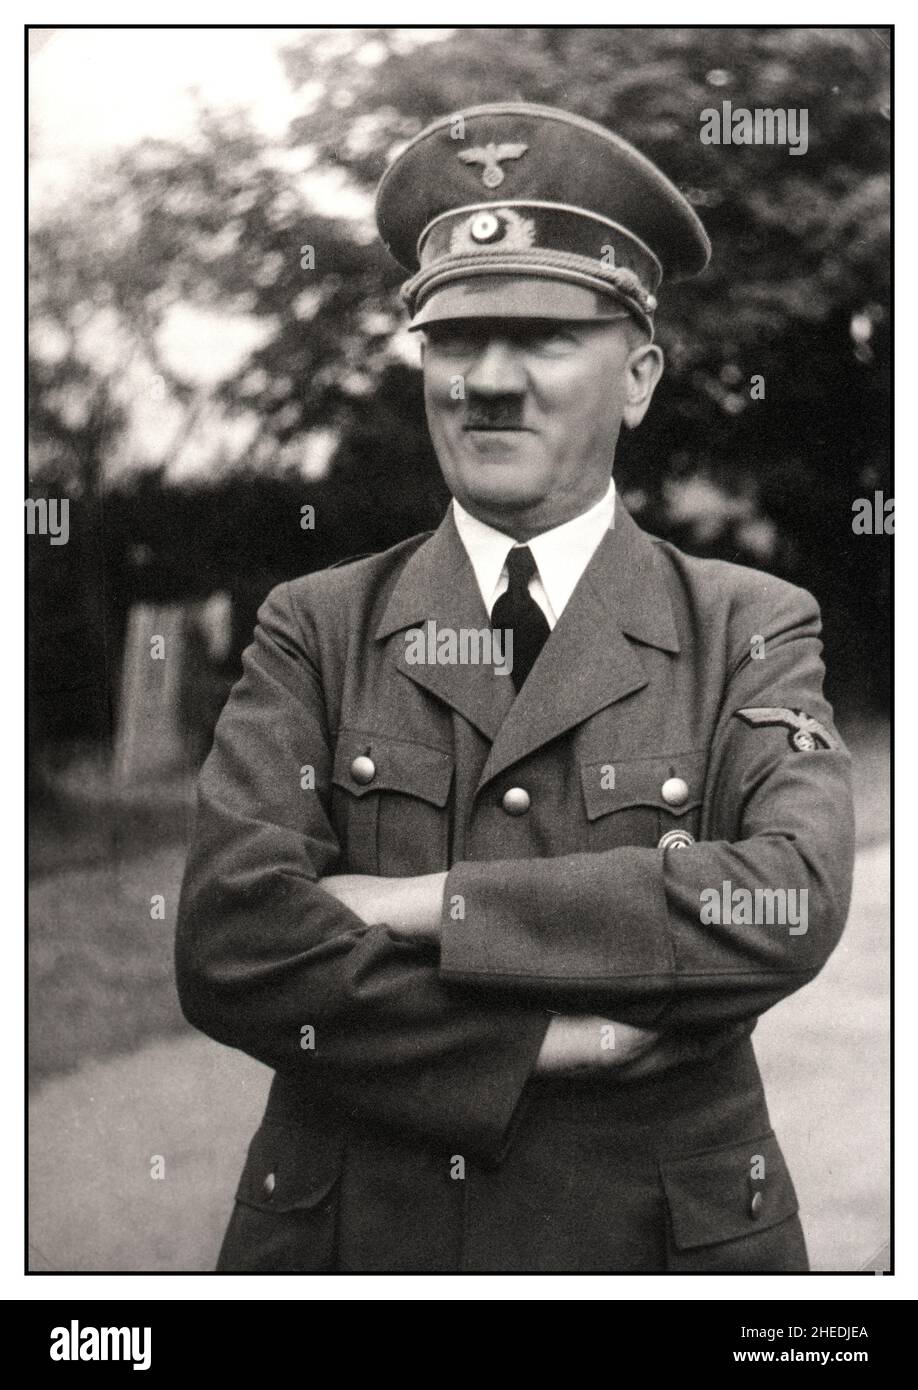 Adolf Hitler in uniform WW2  with arms folded, outside with confident smiling expression 1930s/1940s World War II Stock Photo